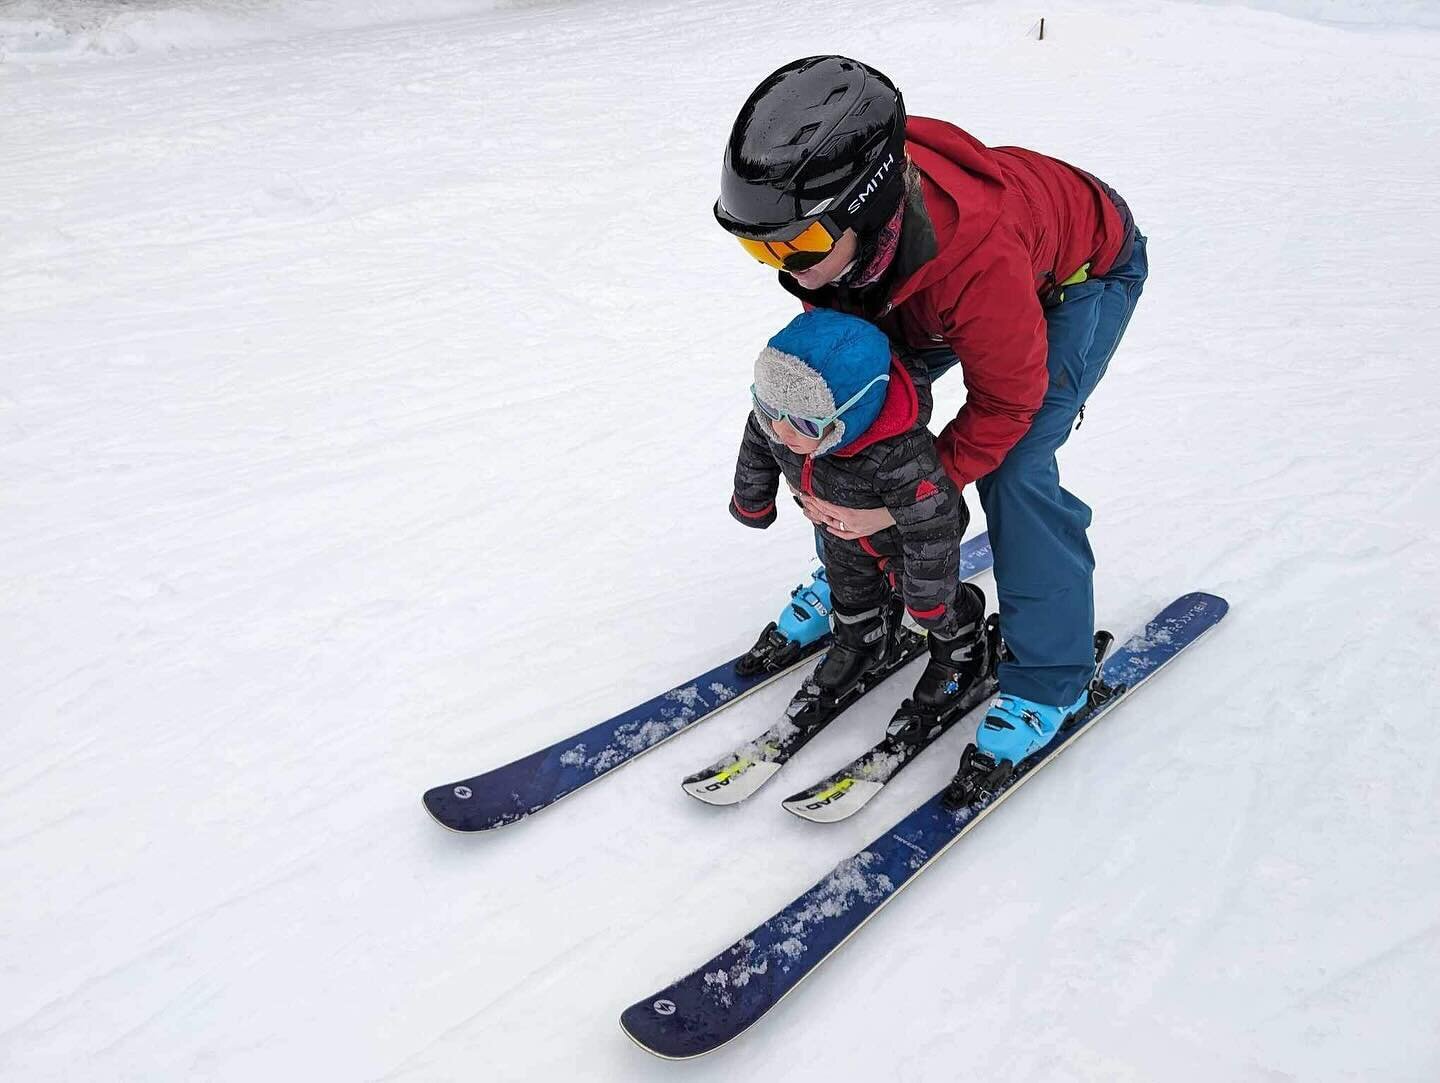 Be still, my heart! My son&rsquo;s first day shredding, and he was&hellip; shready! The features of the bunny slope included: zoom, up!, and SNACK! 
.
.
.
@jonathanlmarshall @skiwillamette 
.
#skiwillamette #ski #skilife #bunnyslope #toddswhoski #wob